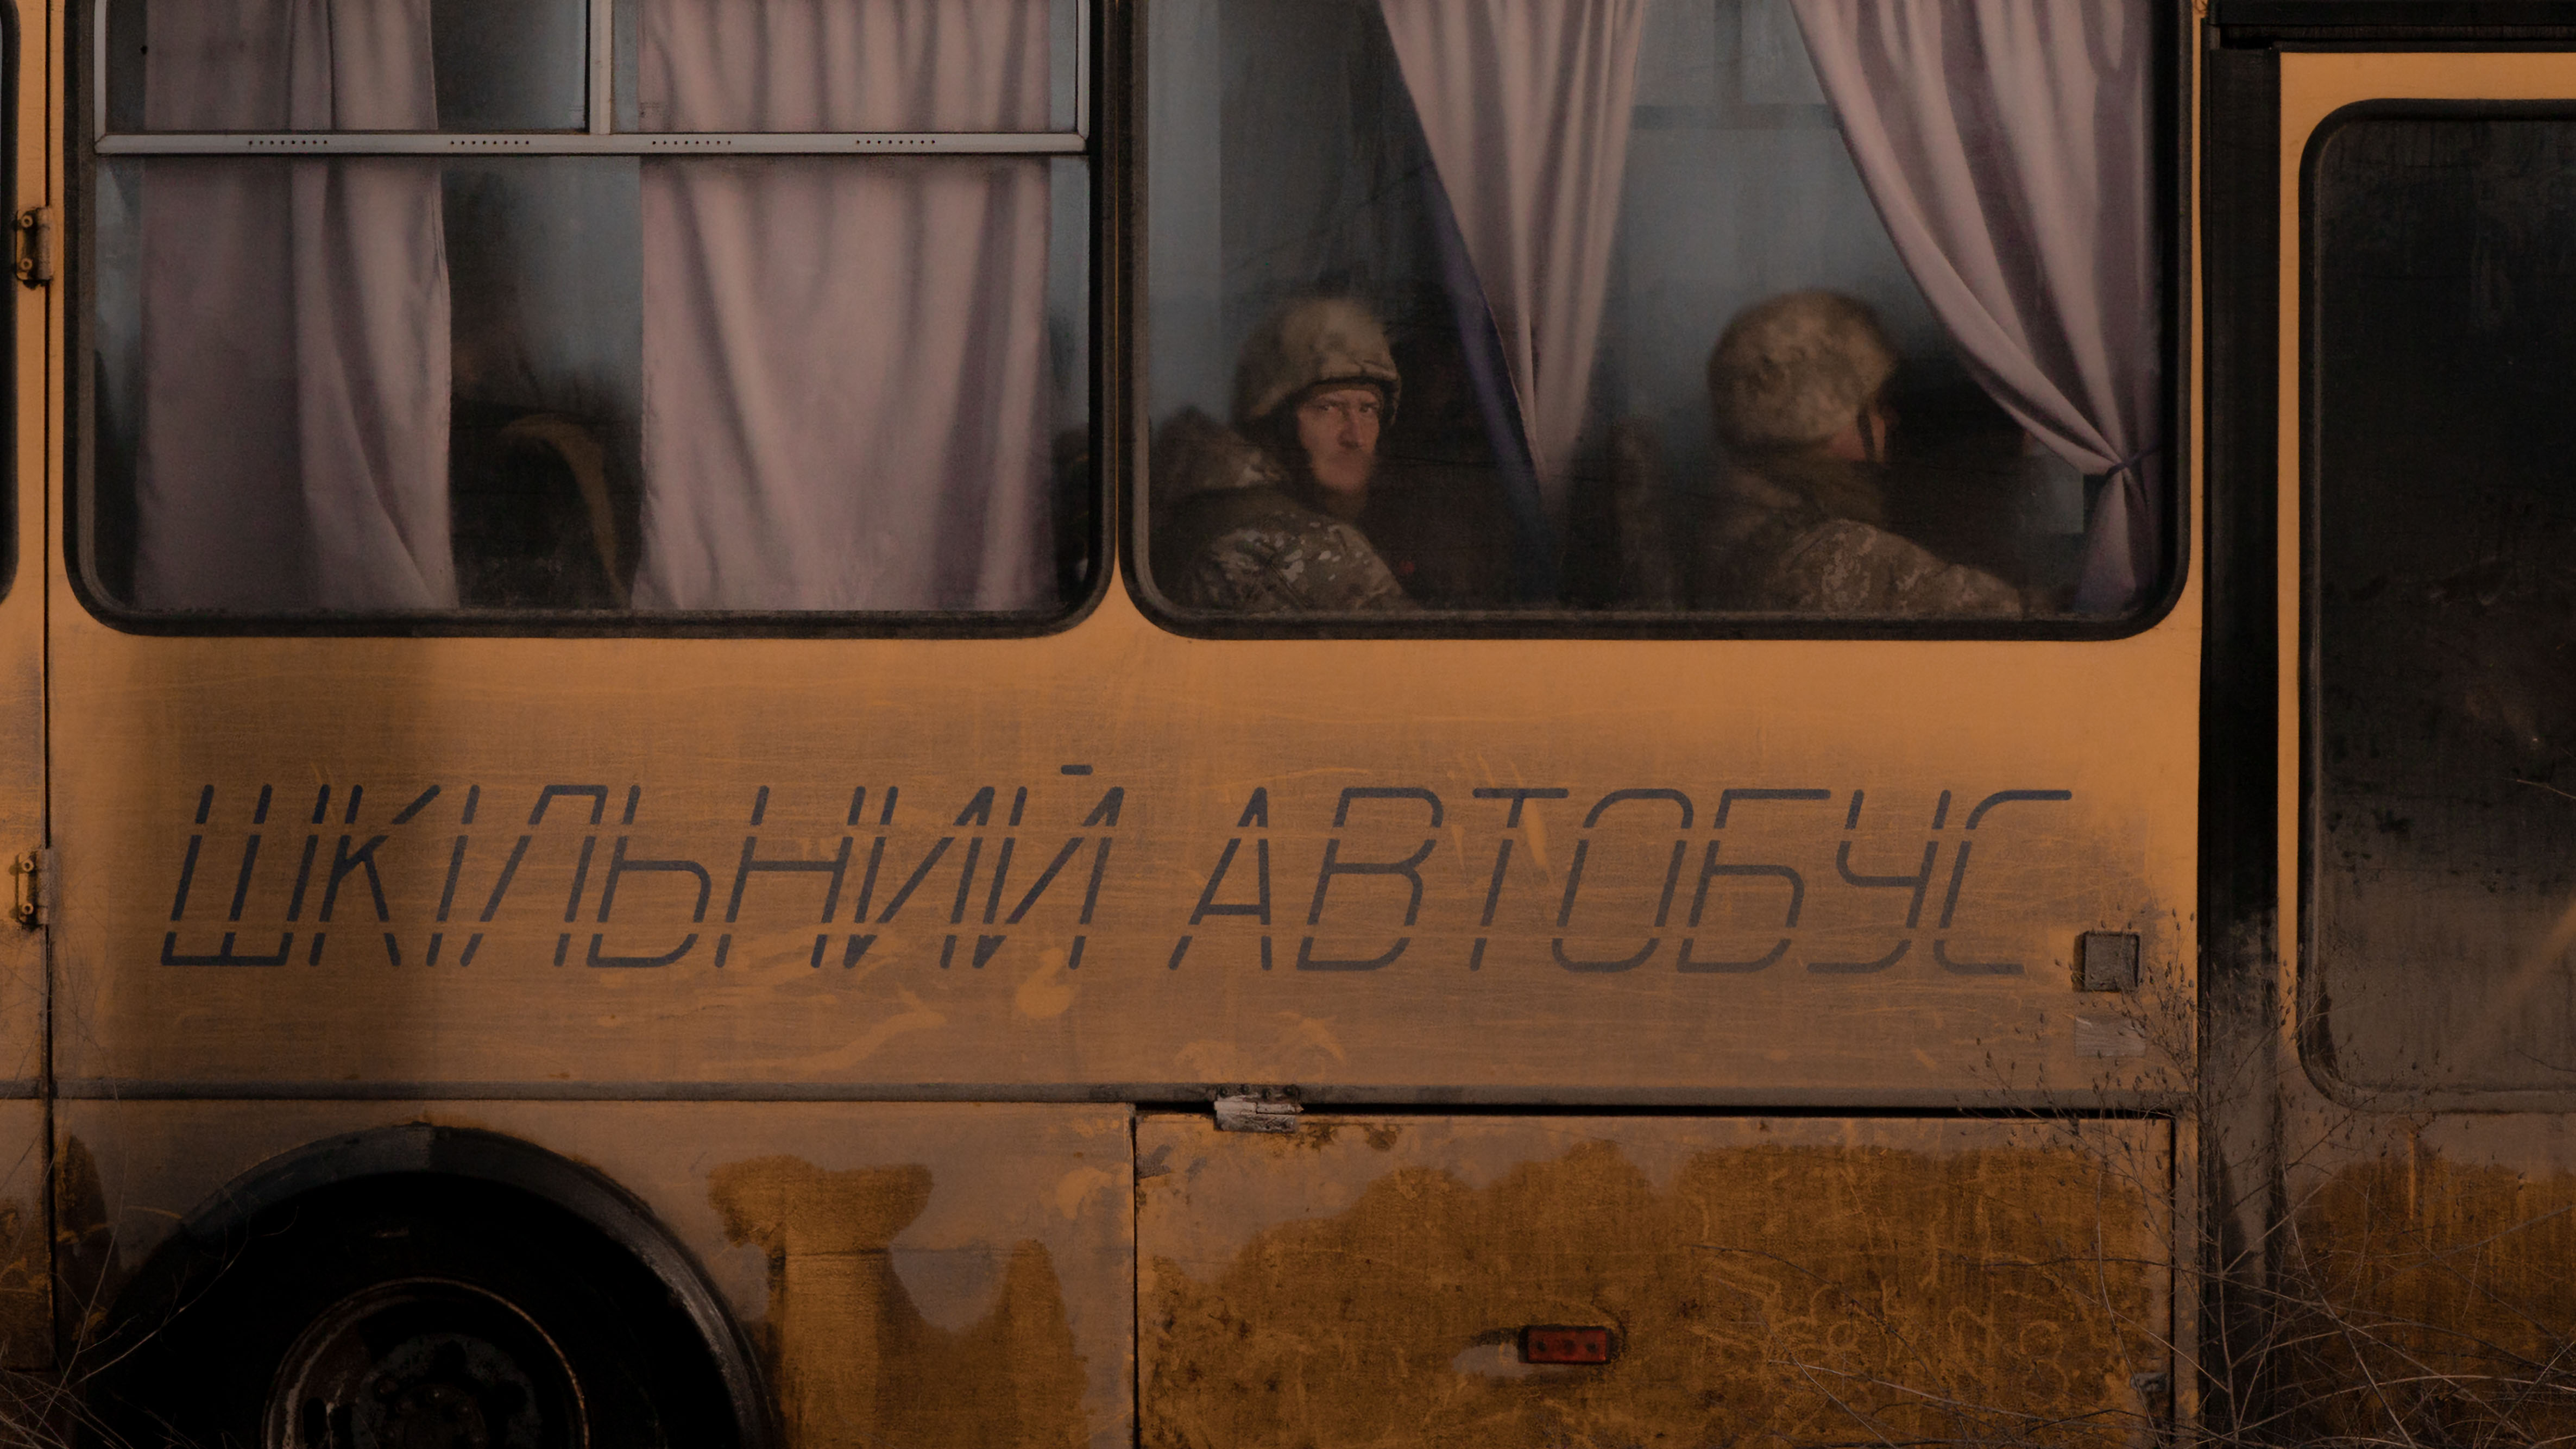 A school bus in the Kupiansk district of Kharkiv province transports troops from the front line in February 2023.